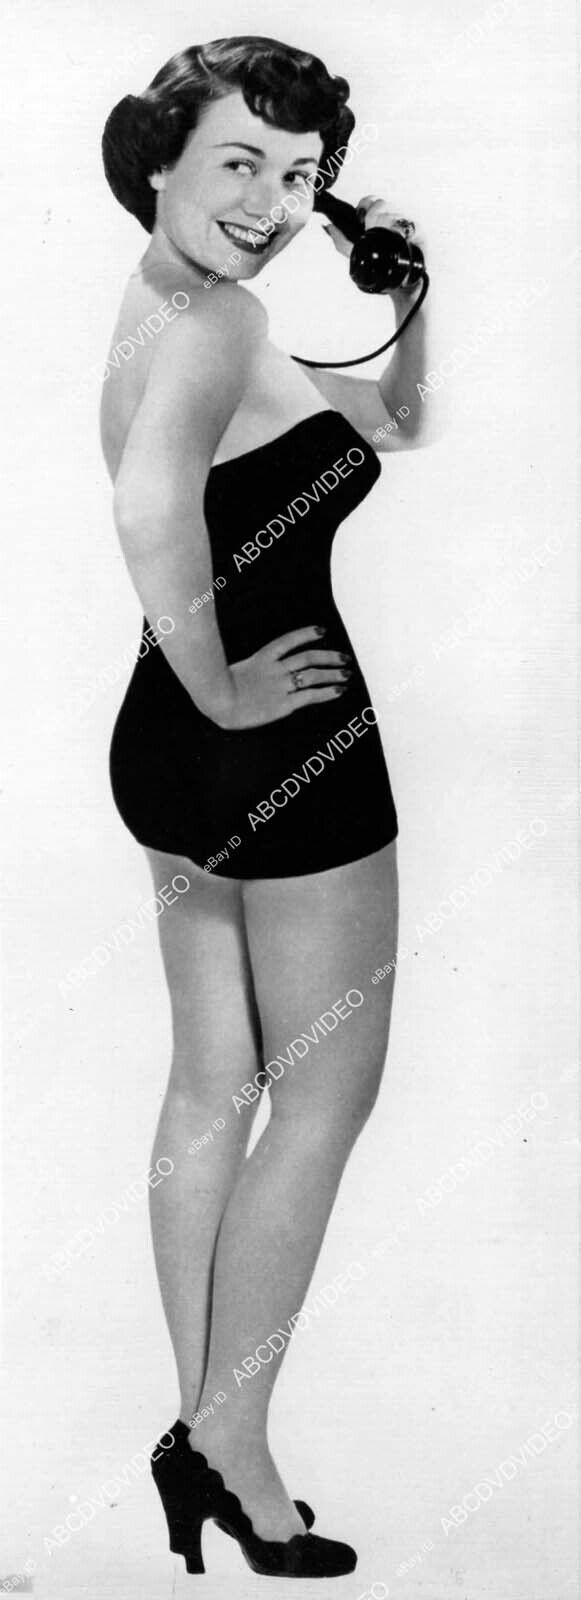 crp-69110 1951 sexy telephone pinup singer Connie Haines new USMC Marine Corps r